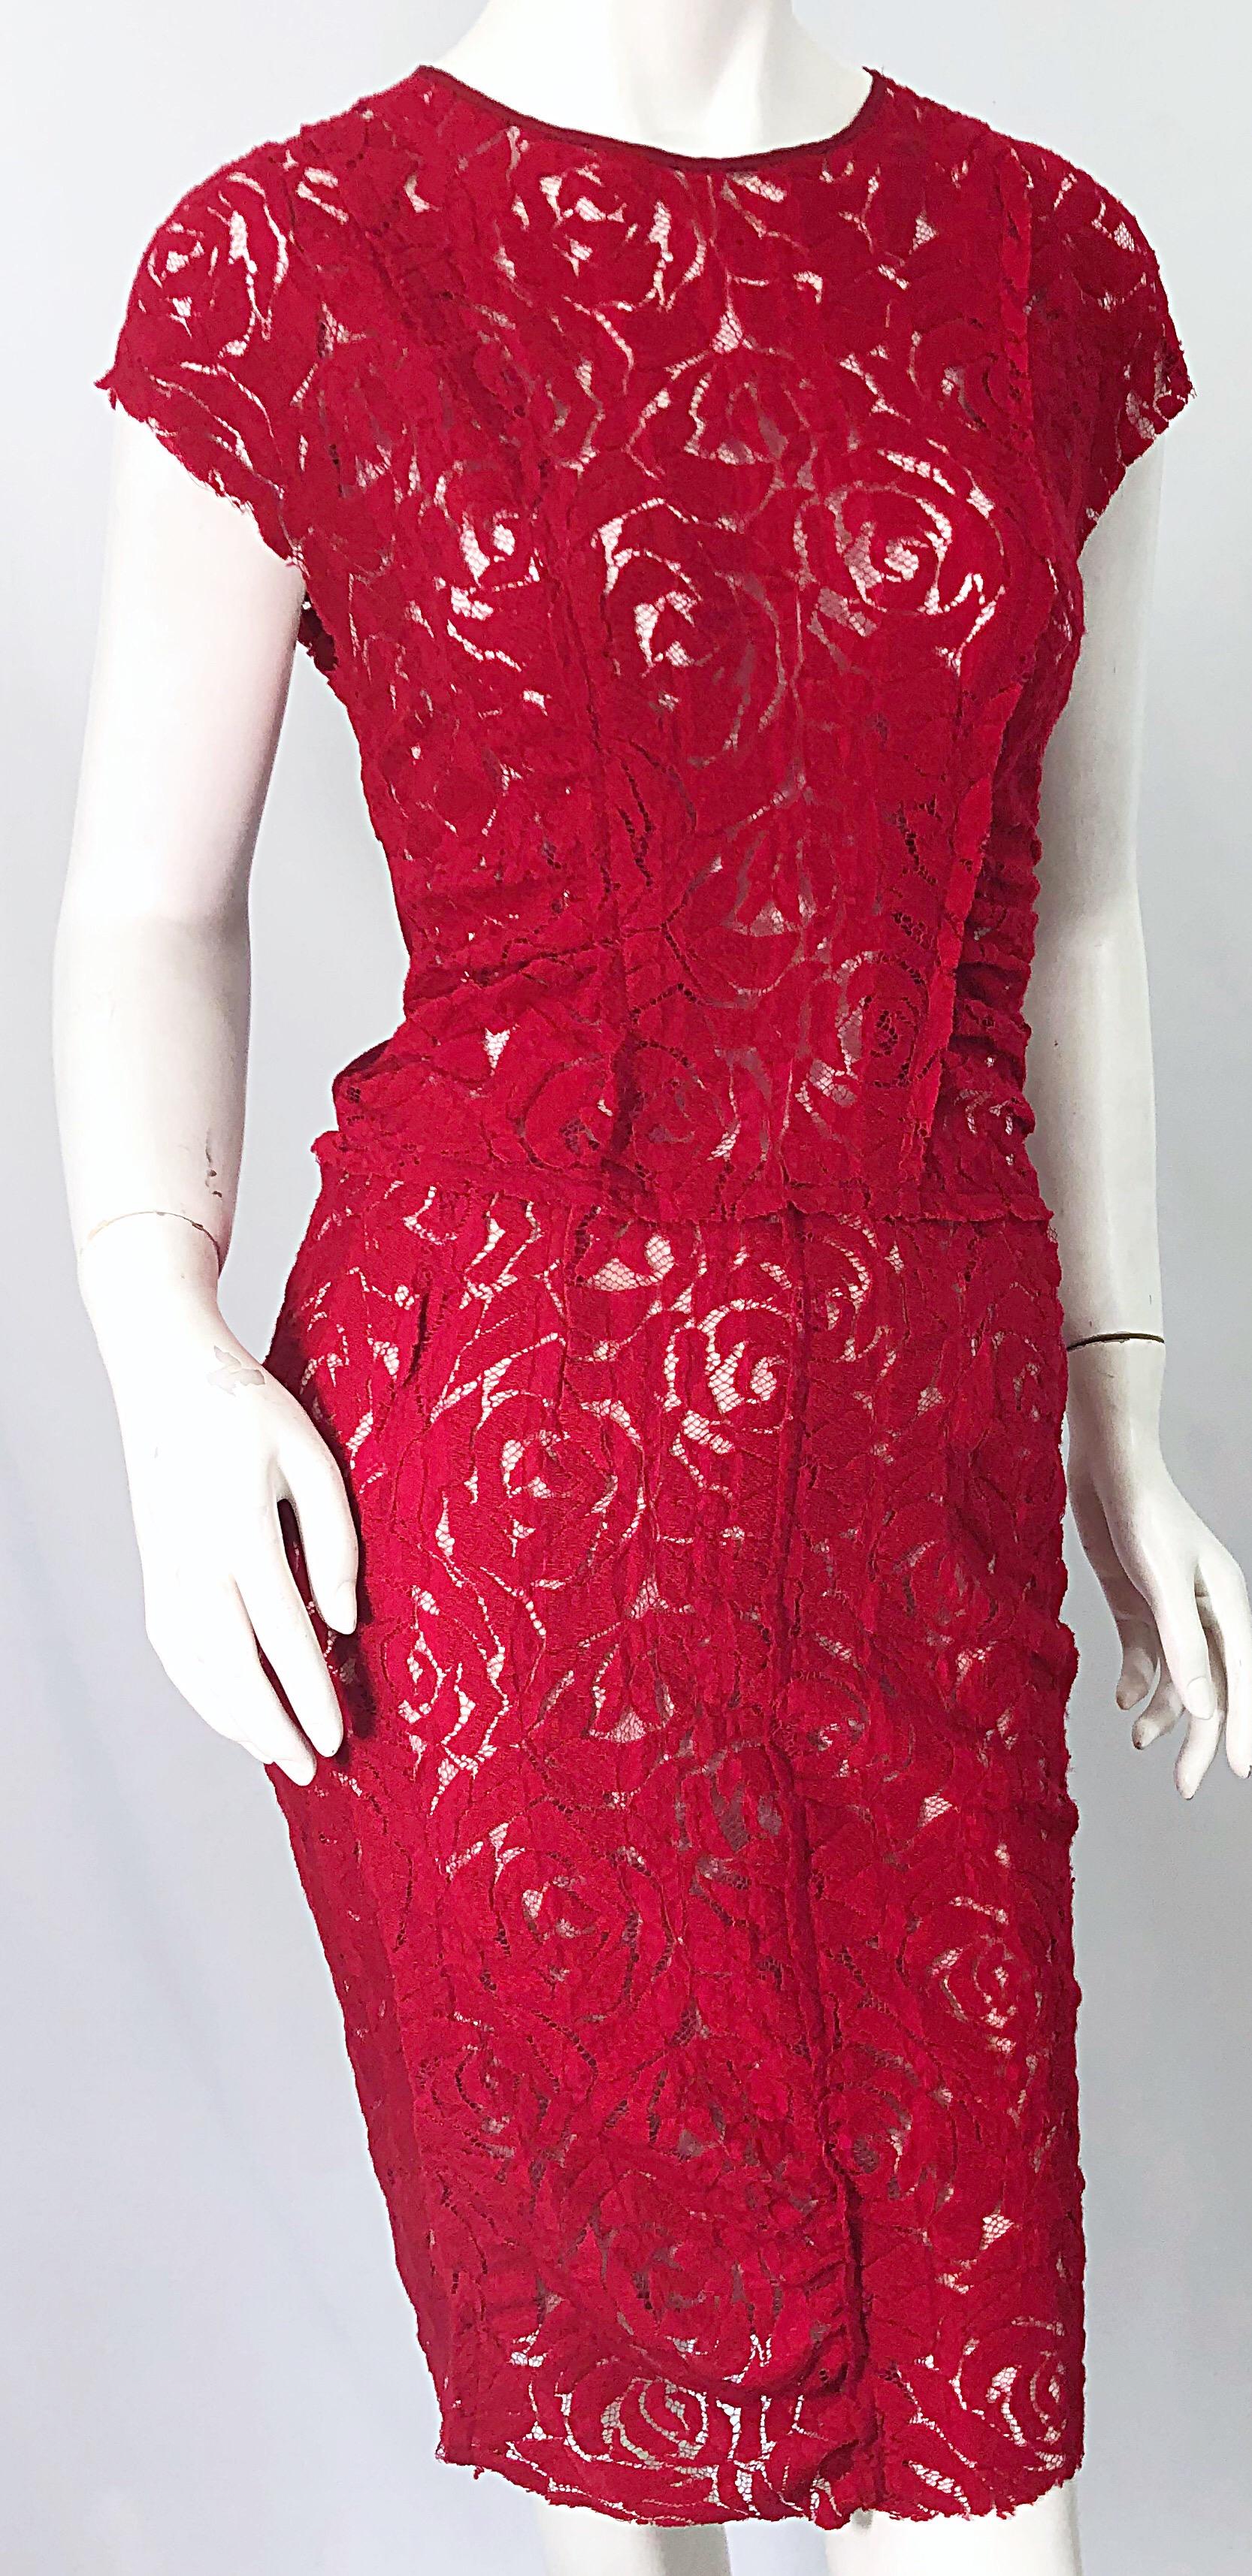 Nina Ricci 2000s Lipstick Red Lace Size 42 ( 8 ) Short Sleeve Vintage Dress In Excellent Condition For Sale In San Diego, CA